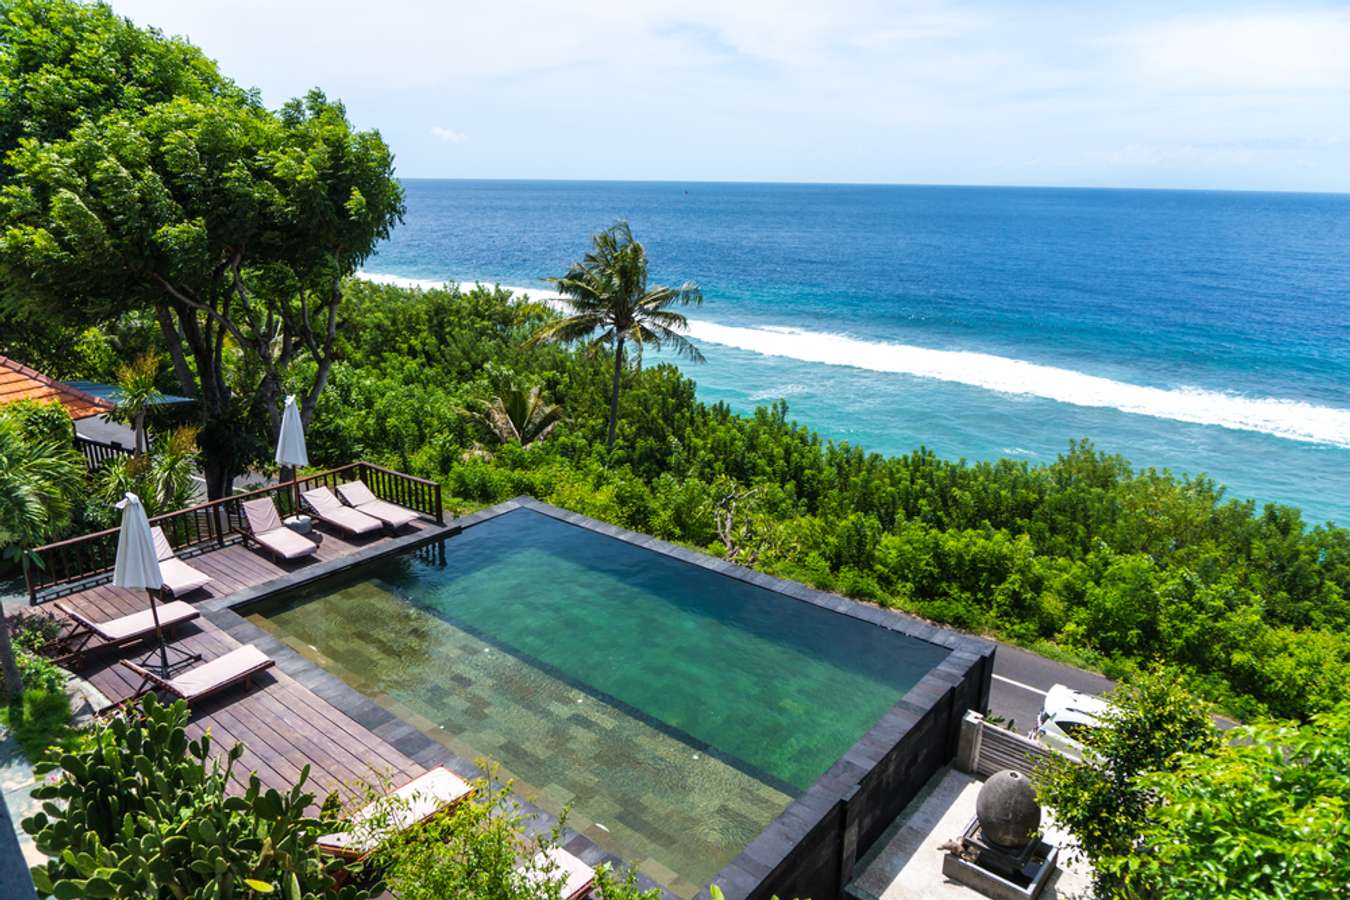 Travel Tips to Bali